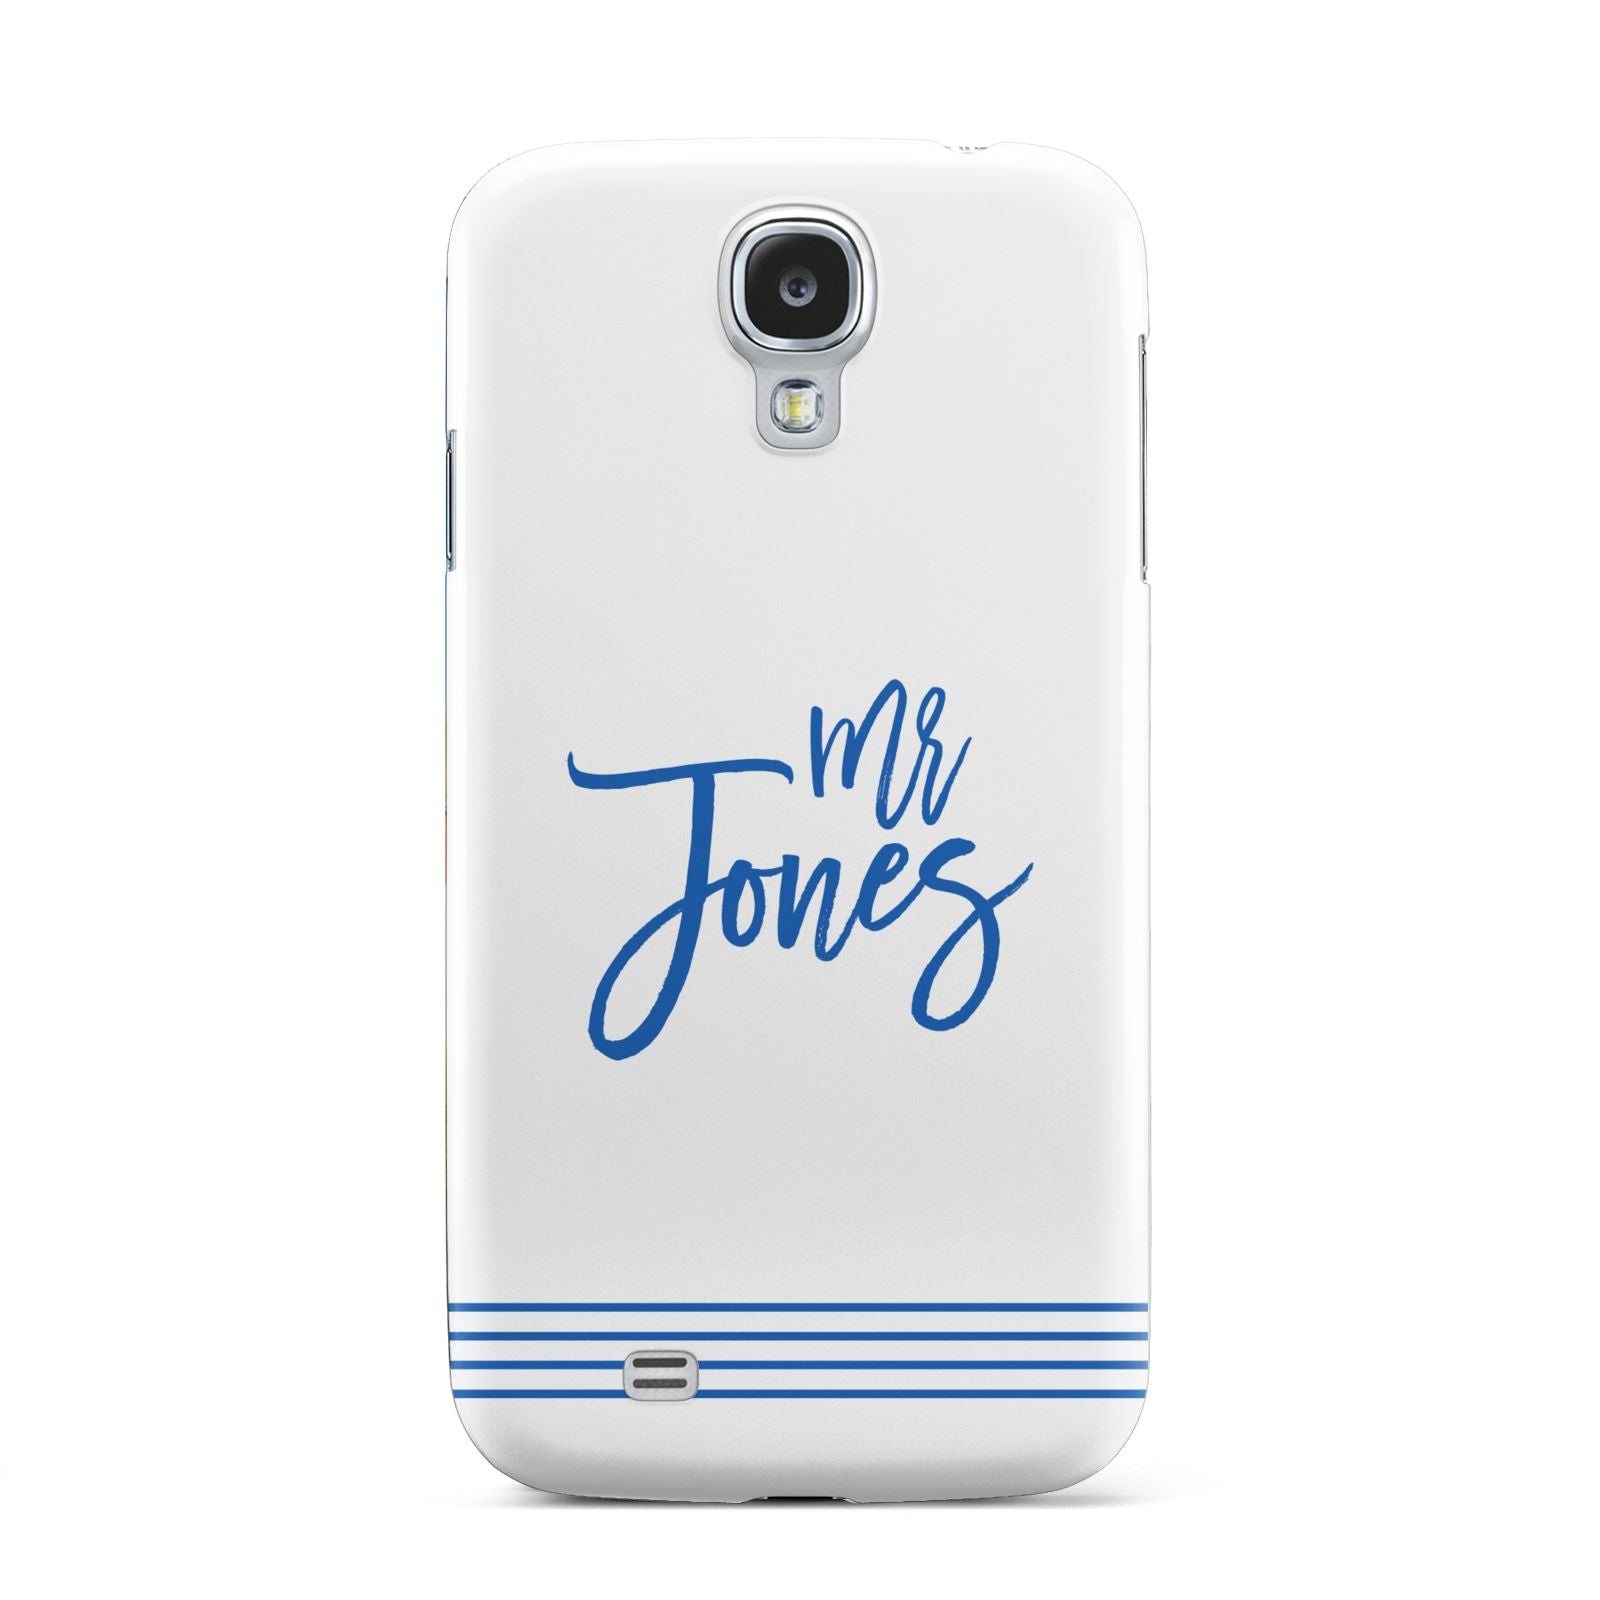 Personalised His Samsung Galaxy S4 Case